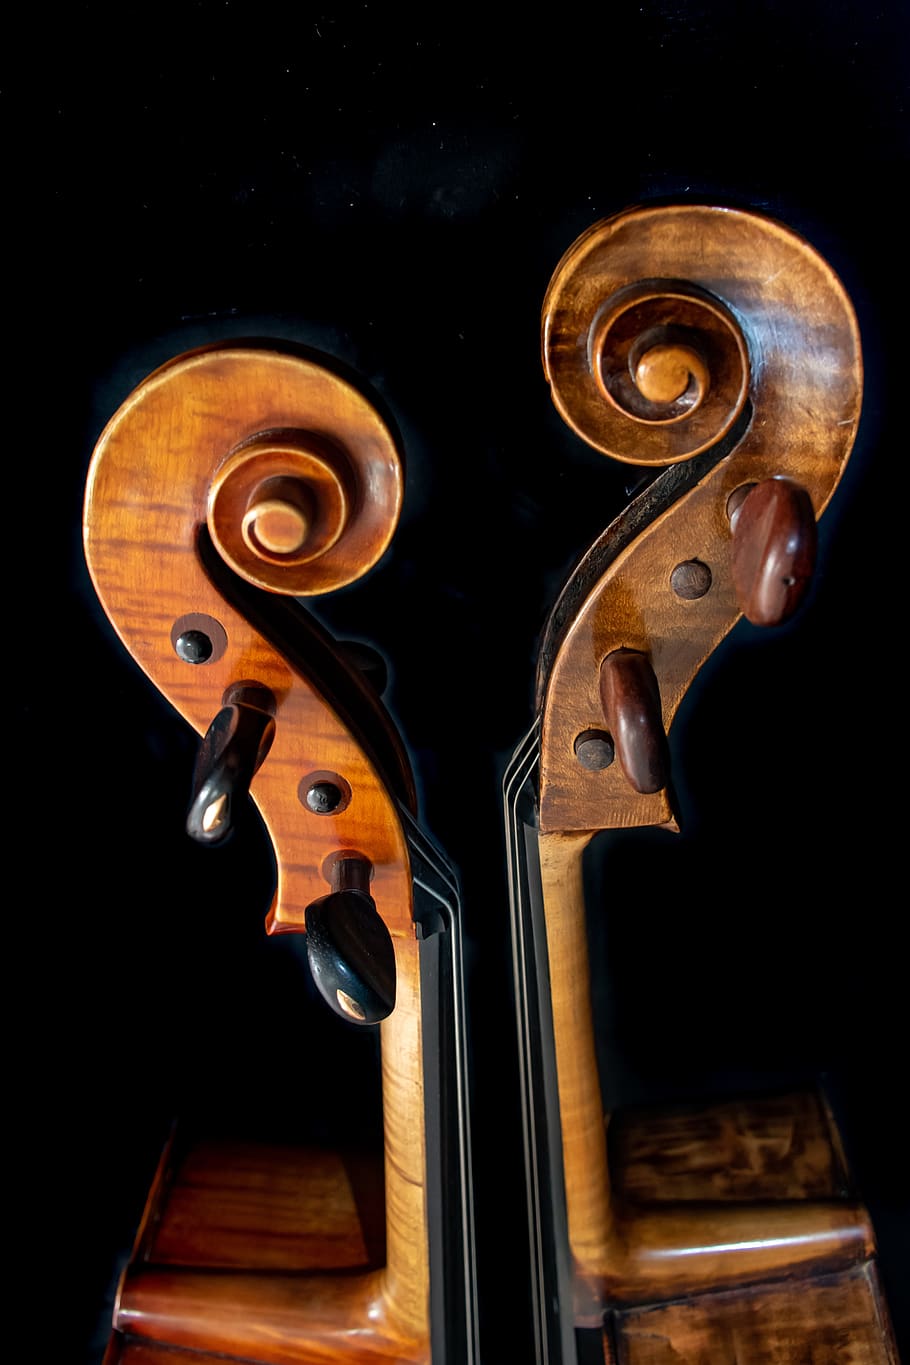 seduction, cello, sound, classic, brown, symphony, concert, orchestra, musical, string